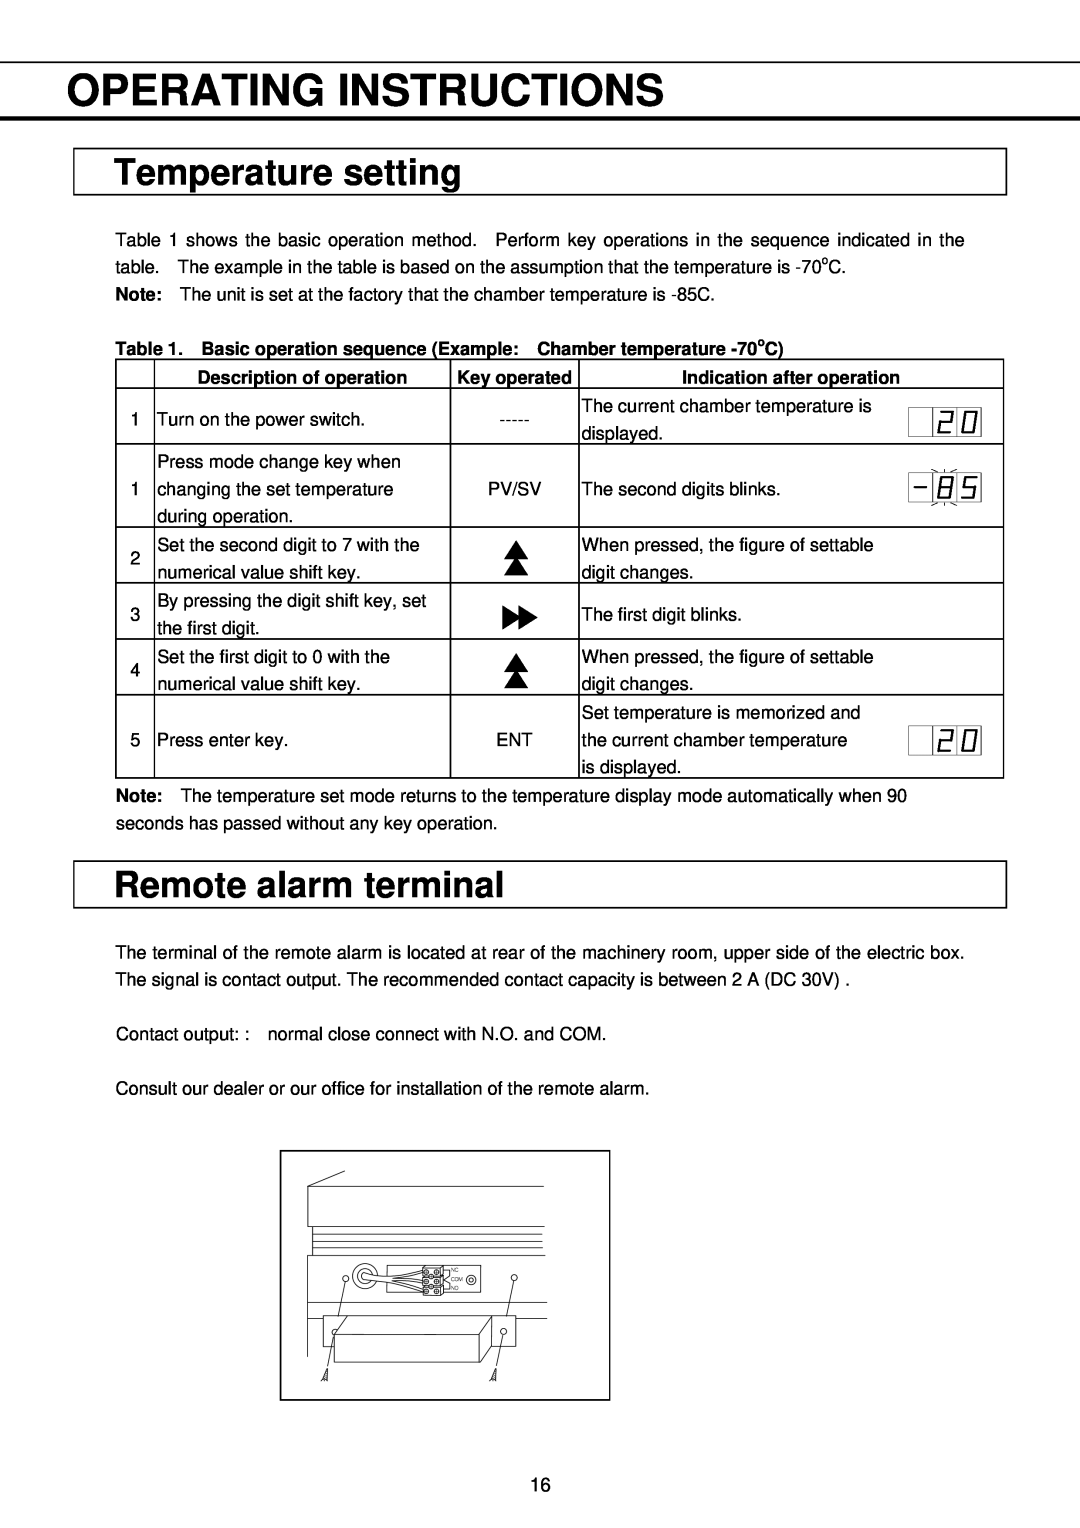 Sanyo MDF-793 Operating Instructions, Temperature setting, Remote alarm terminal, Description of operation, Key operated 